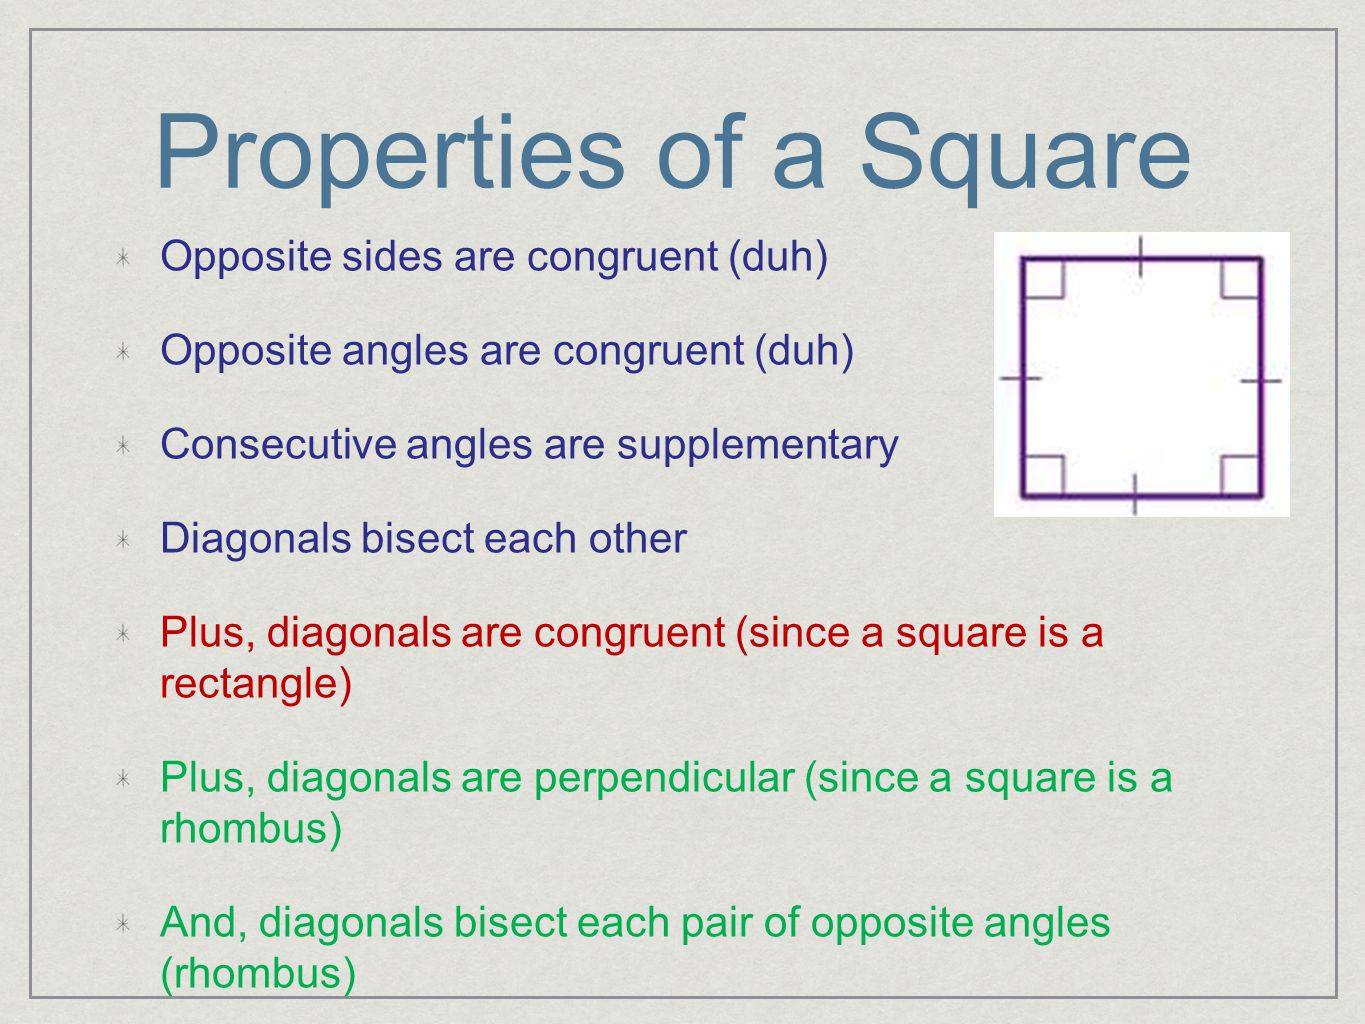 Properties of a Square Opposite sides are congruent (duh) Opposite angles are congruent (duh) Consecutive angles are supplementary Diagonals bisect each other Plus, diagonals are congruent (since a square is a rectangle) Plus, diagonals are perpendicular (since a square is a rhombus) And, diagonals bisect each pair of opposite angles (rhombus)